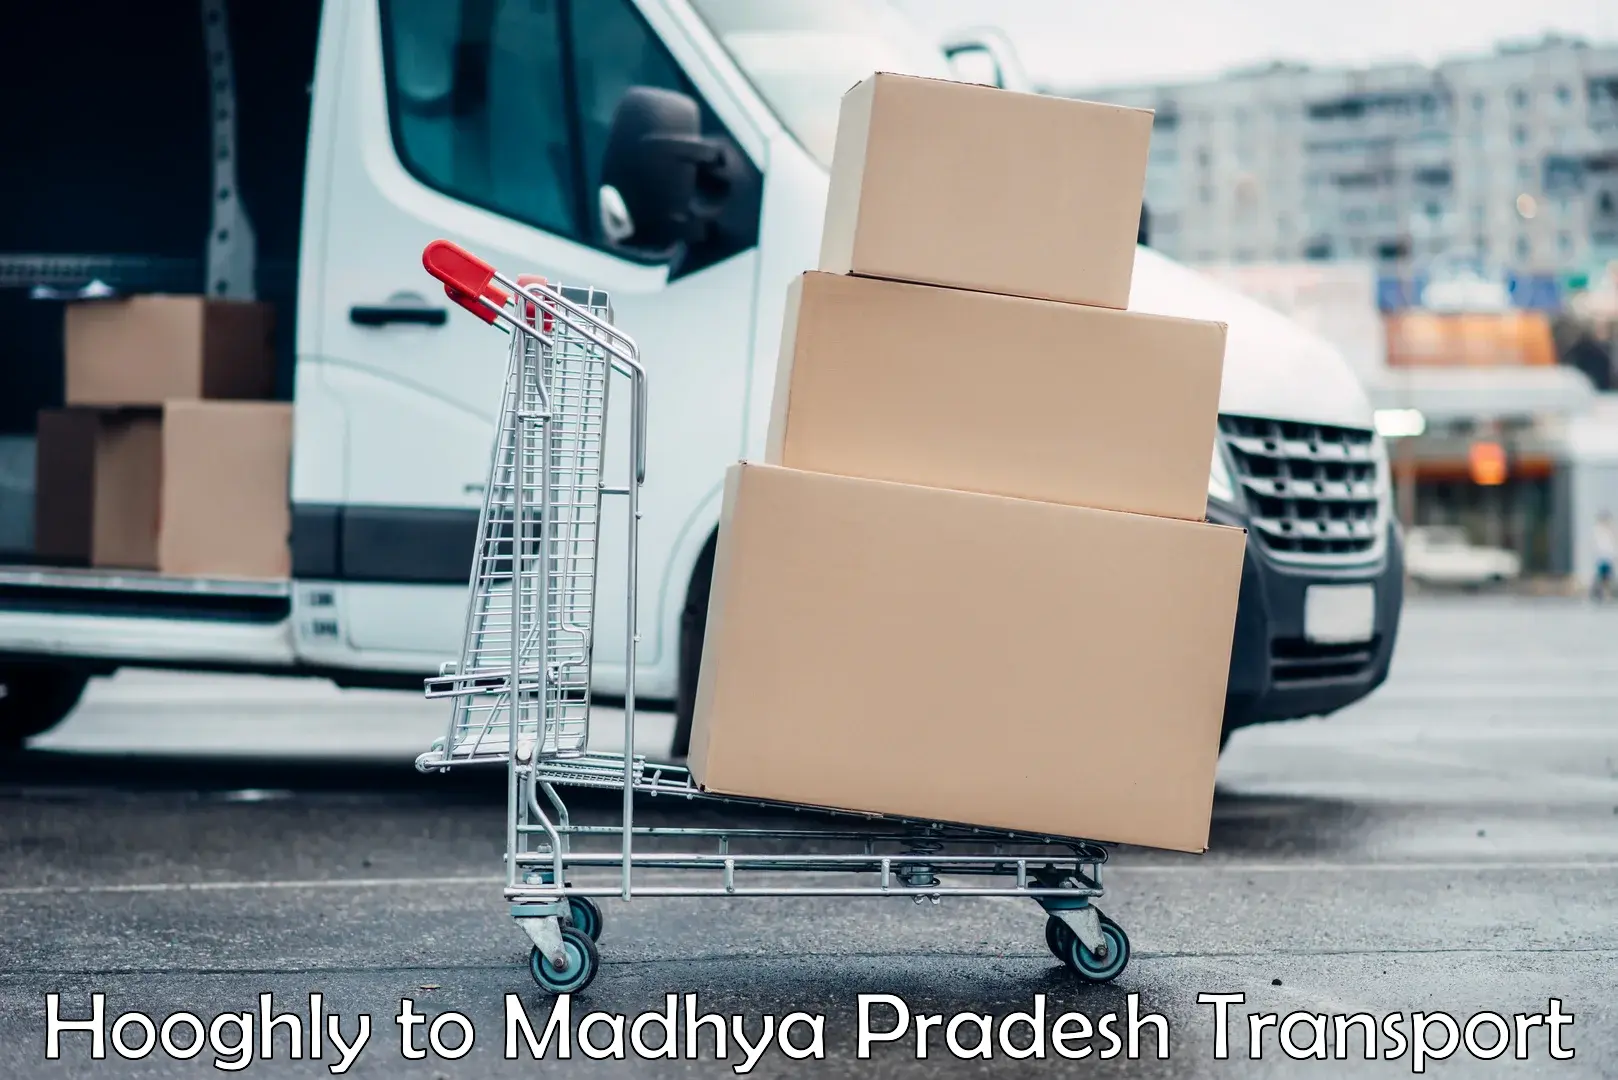 International cargo transportation services Hooghly to Madwas